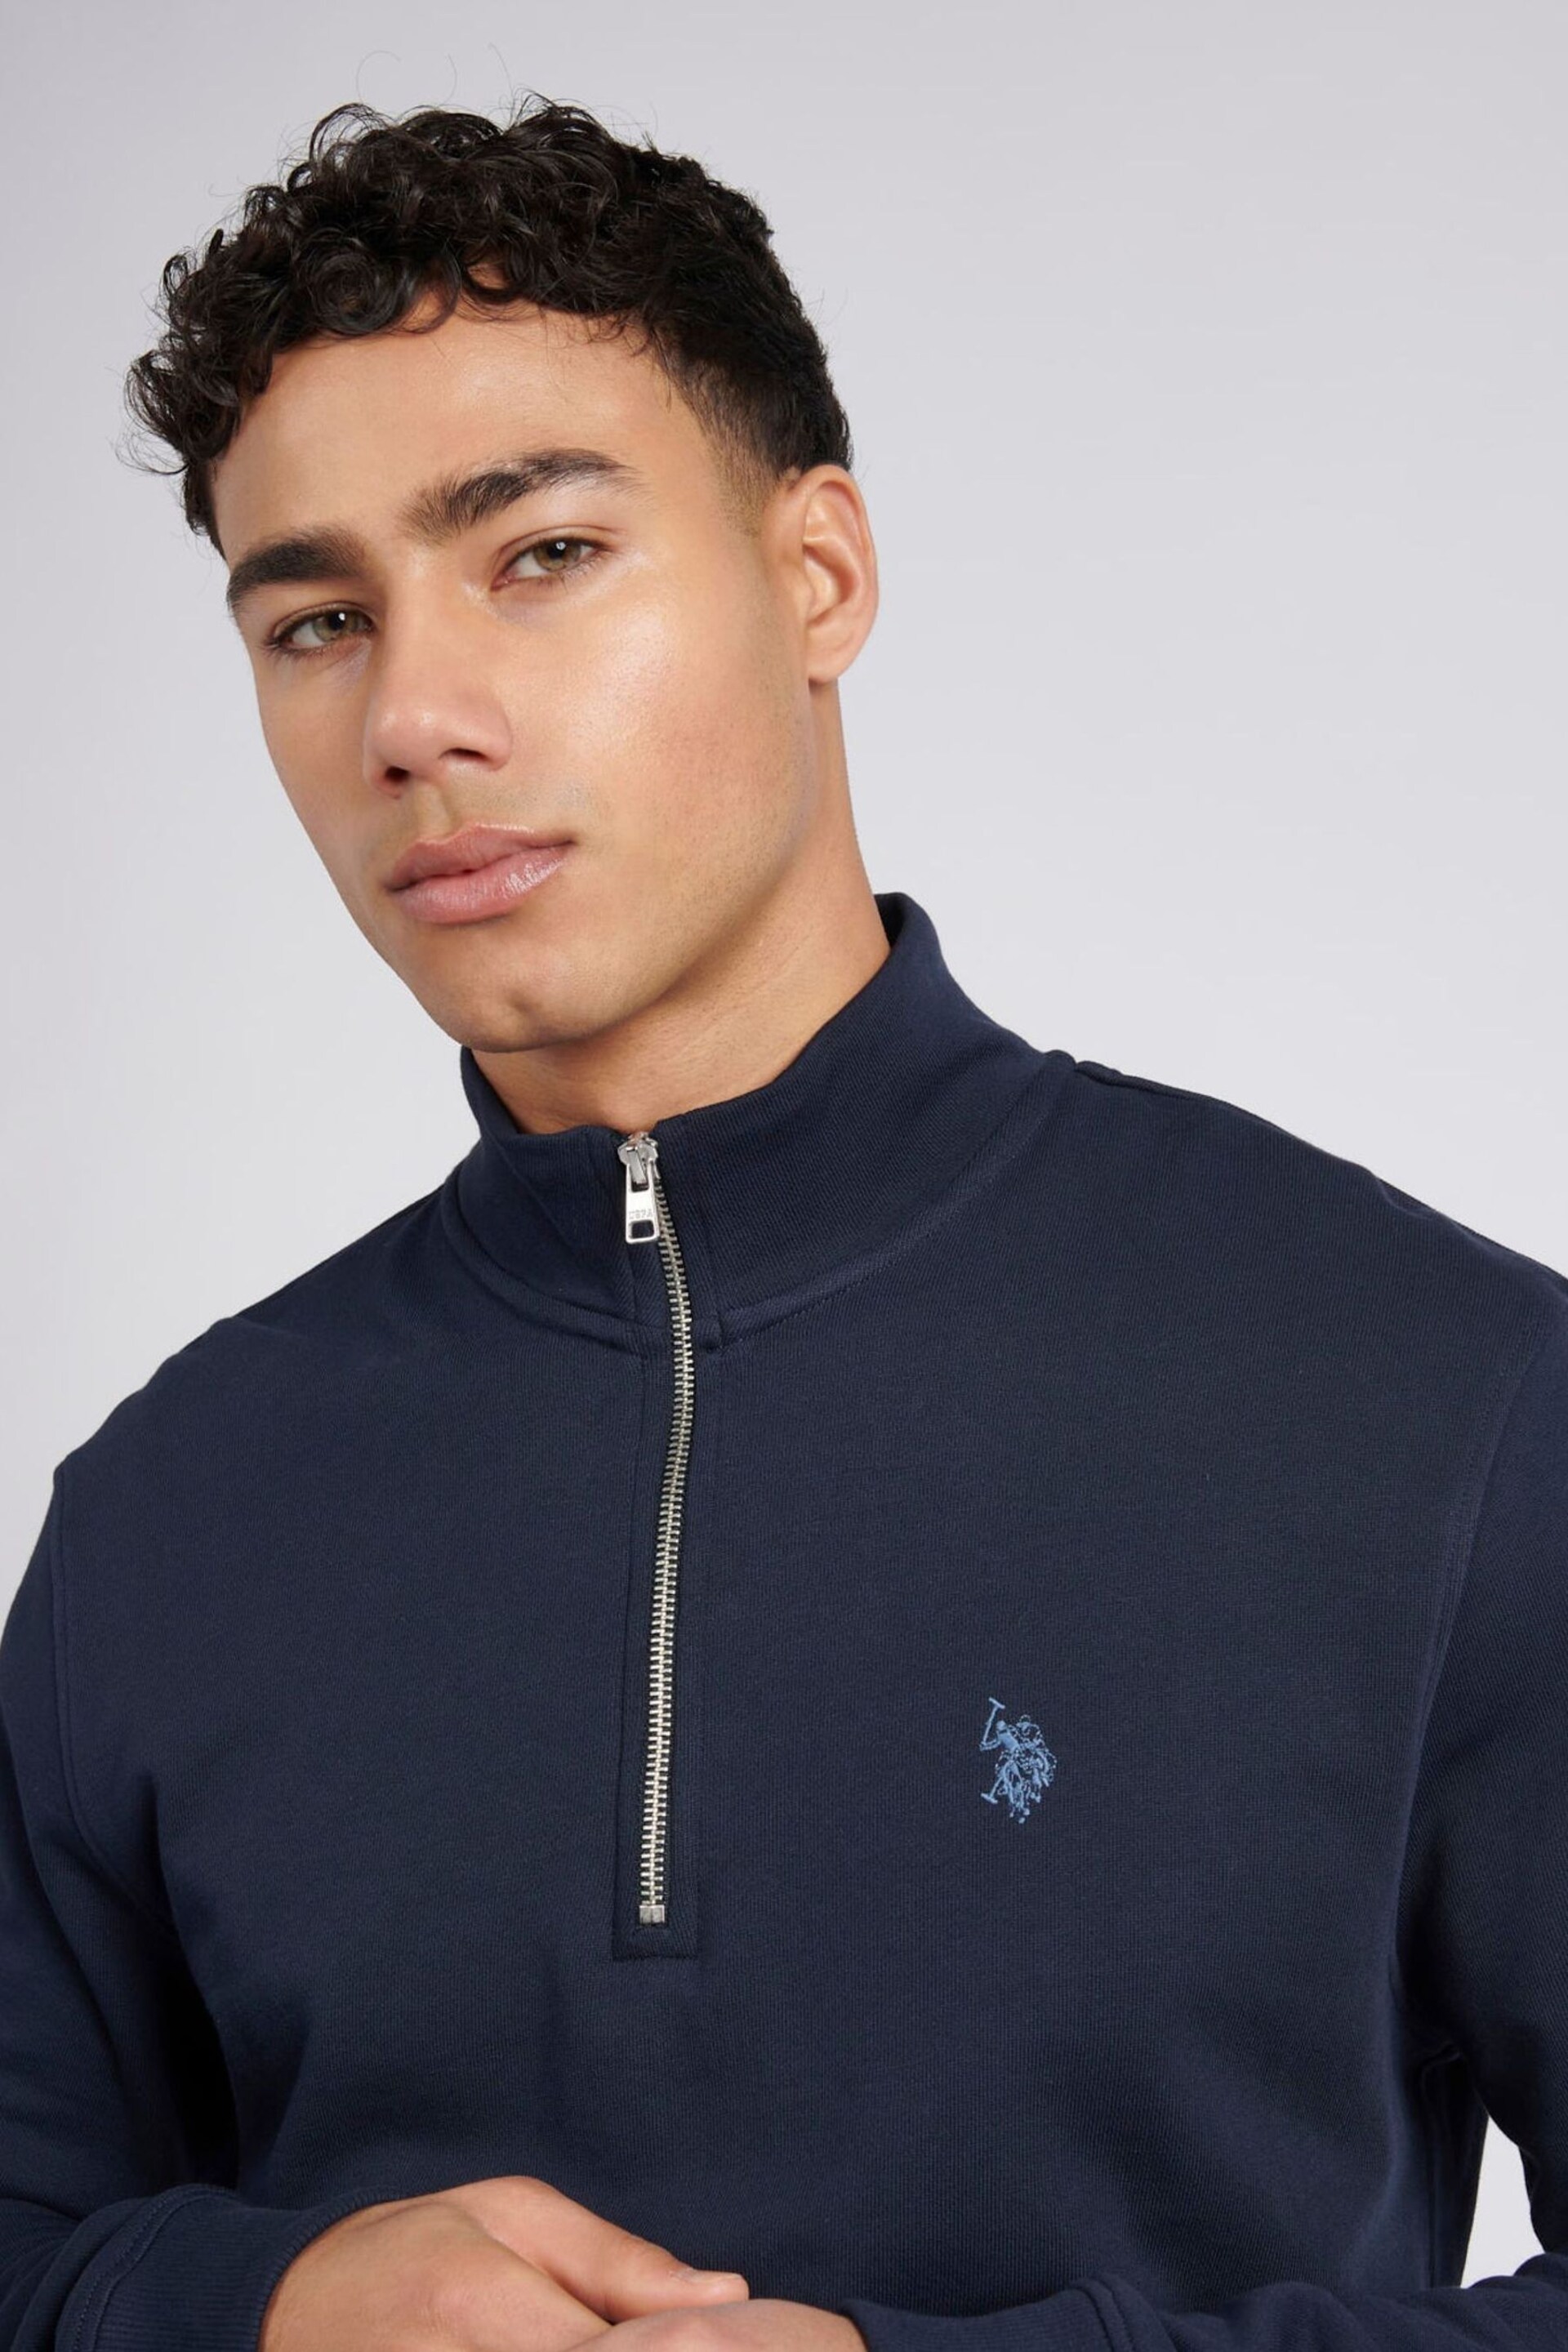 U.S. Polo Assn. Mens Blue Classic Fit Taped 1/4 Zip Sweatshirt - Image 3 of 8